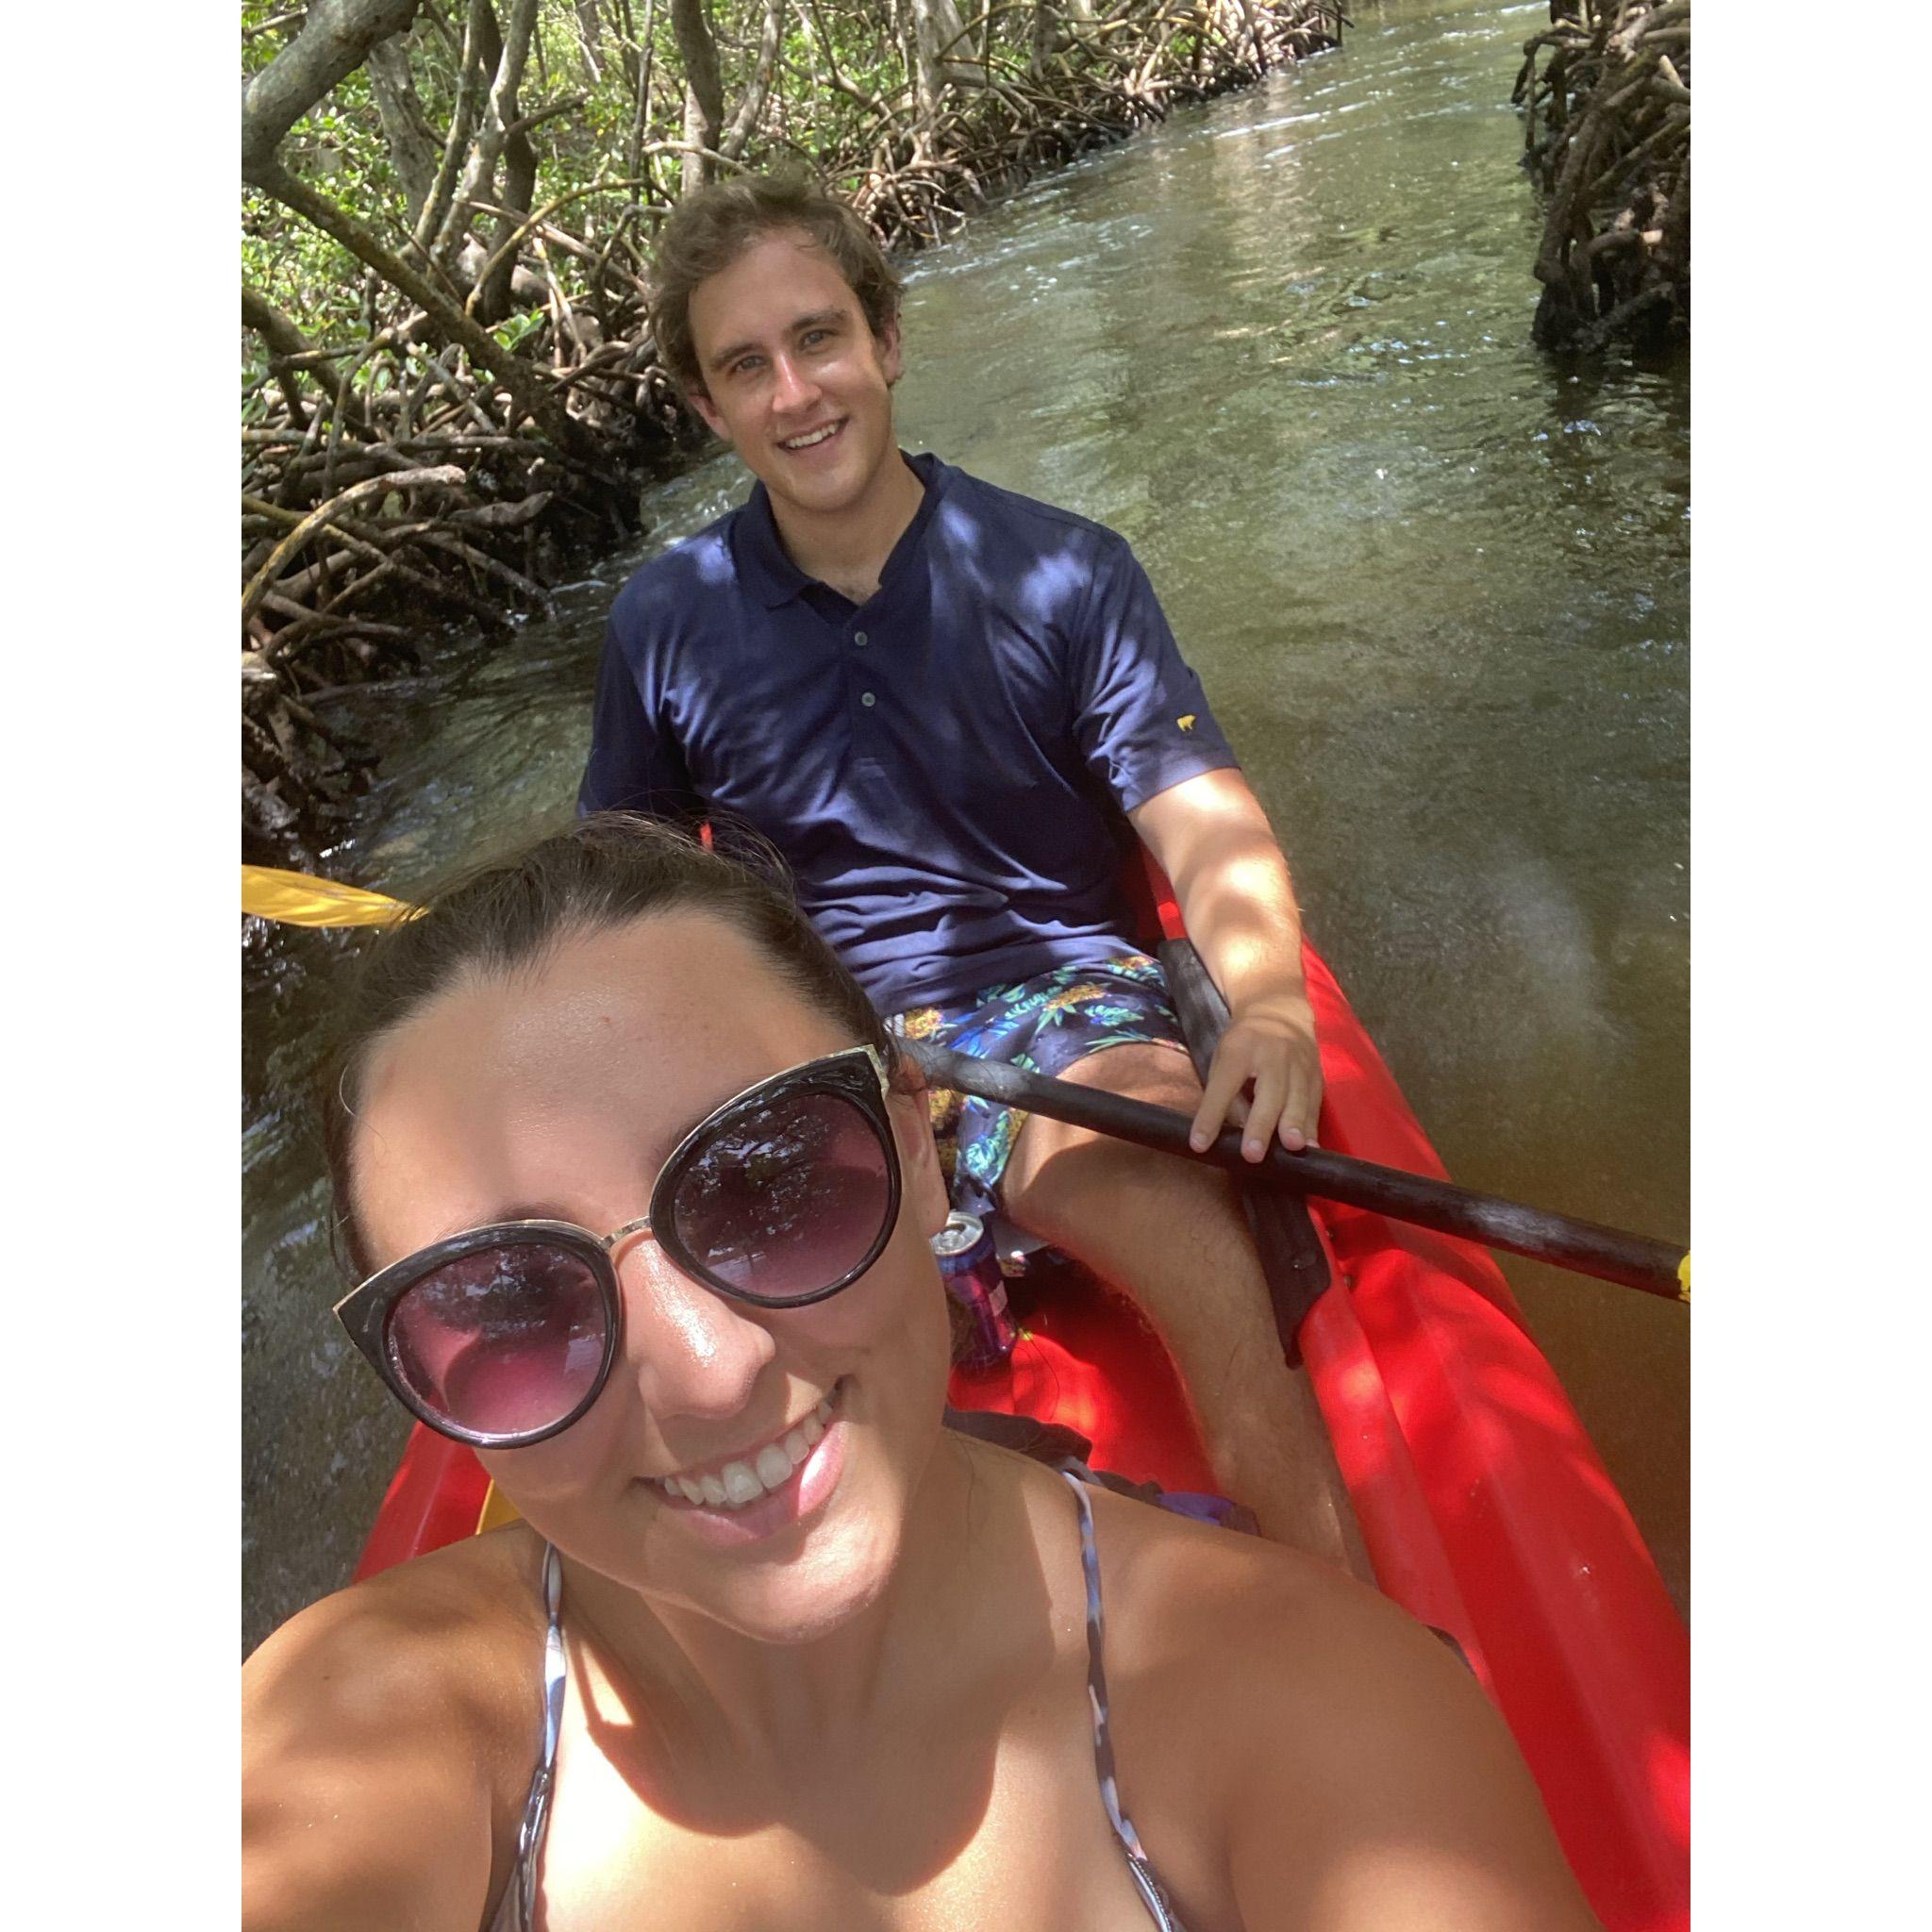 The couple enjoyed a day of kayaking together with Fred's parents in Sarasota, FL!